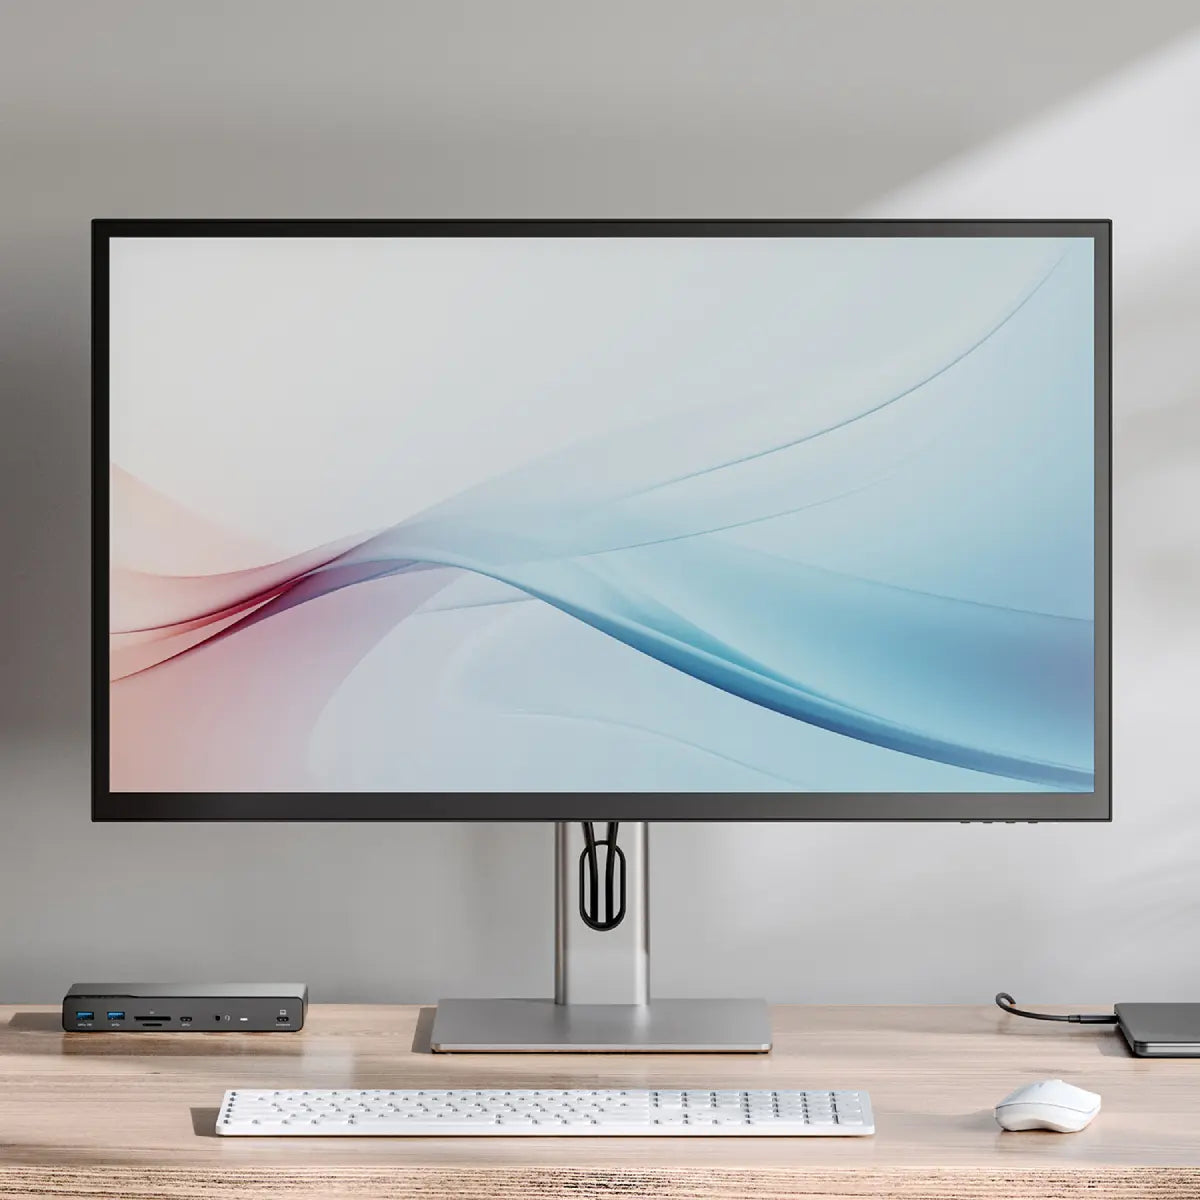 Clarity Max 32" UHD 4K Monitor with USB-C Power Delivery